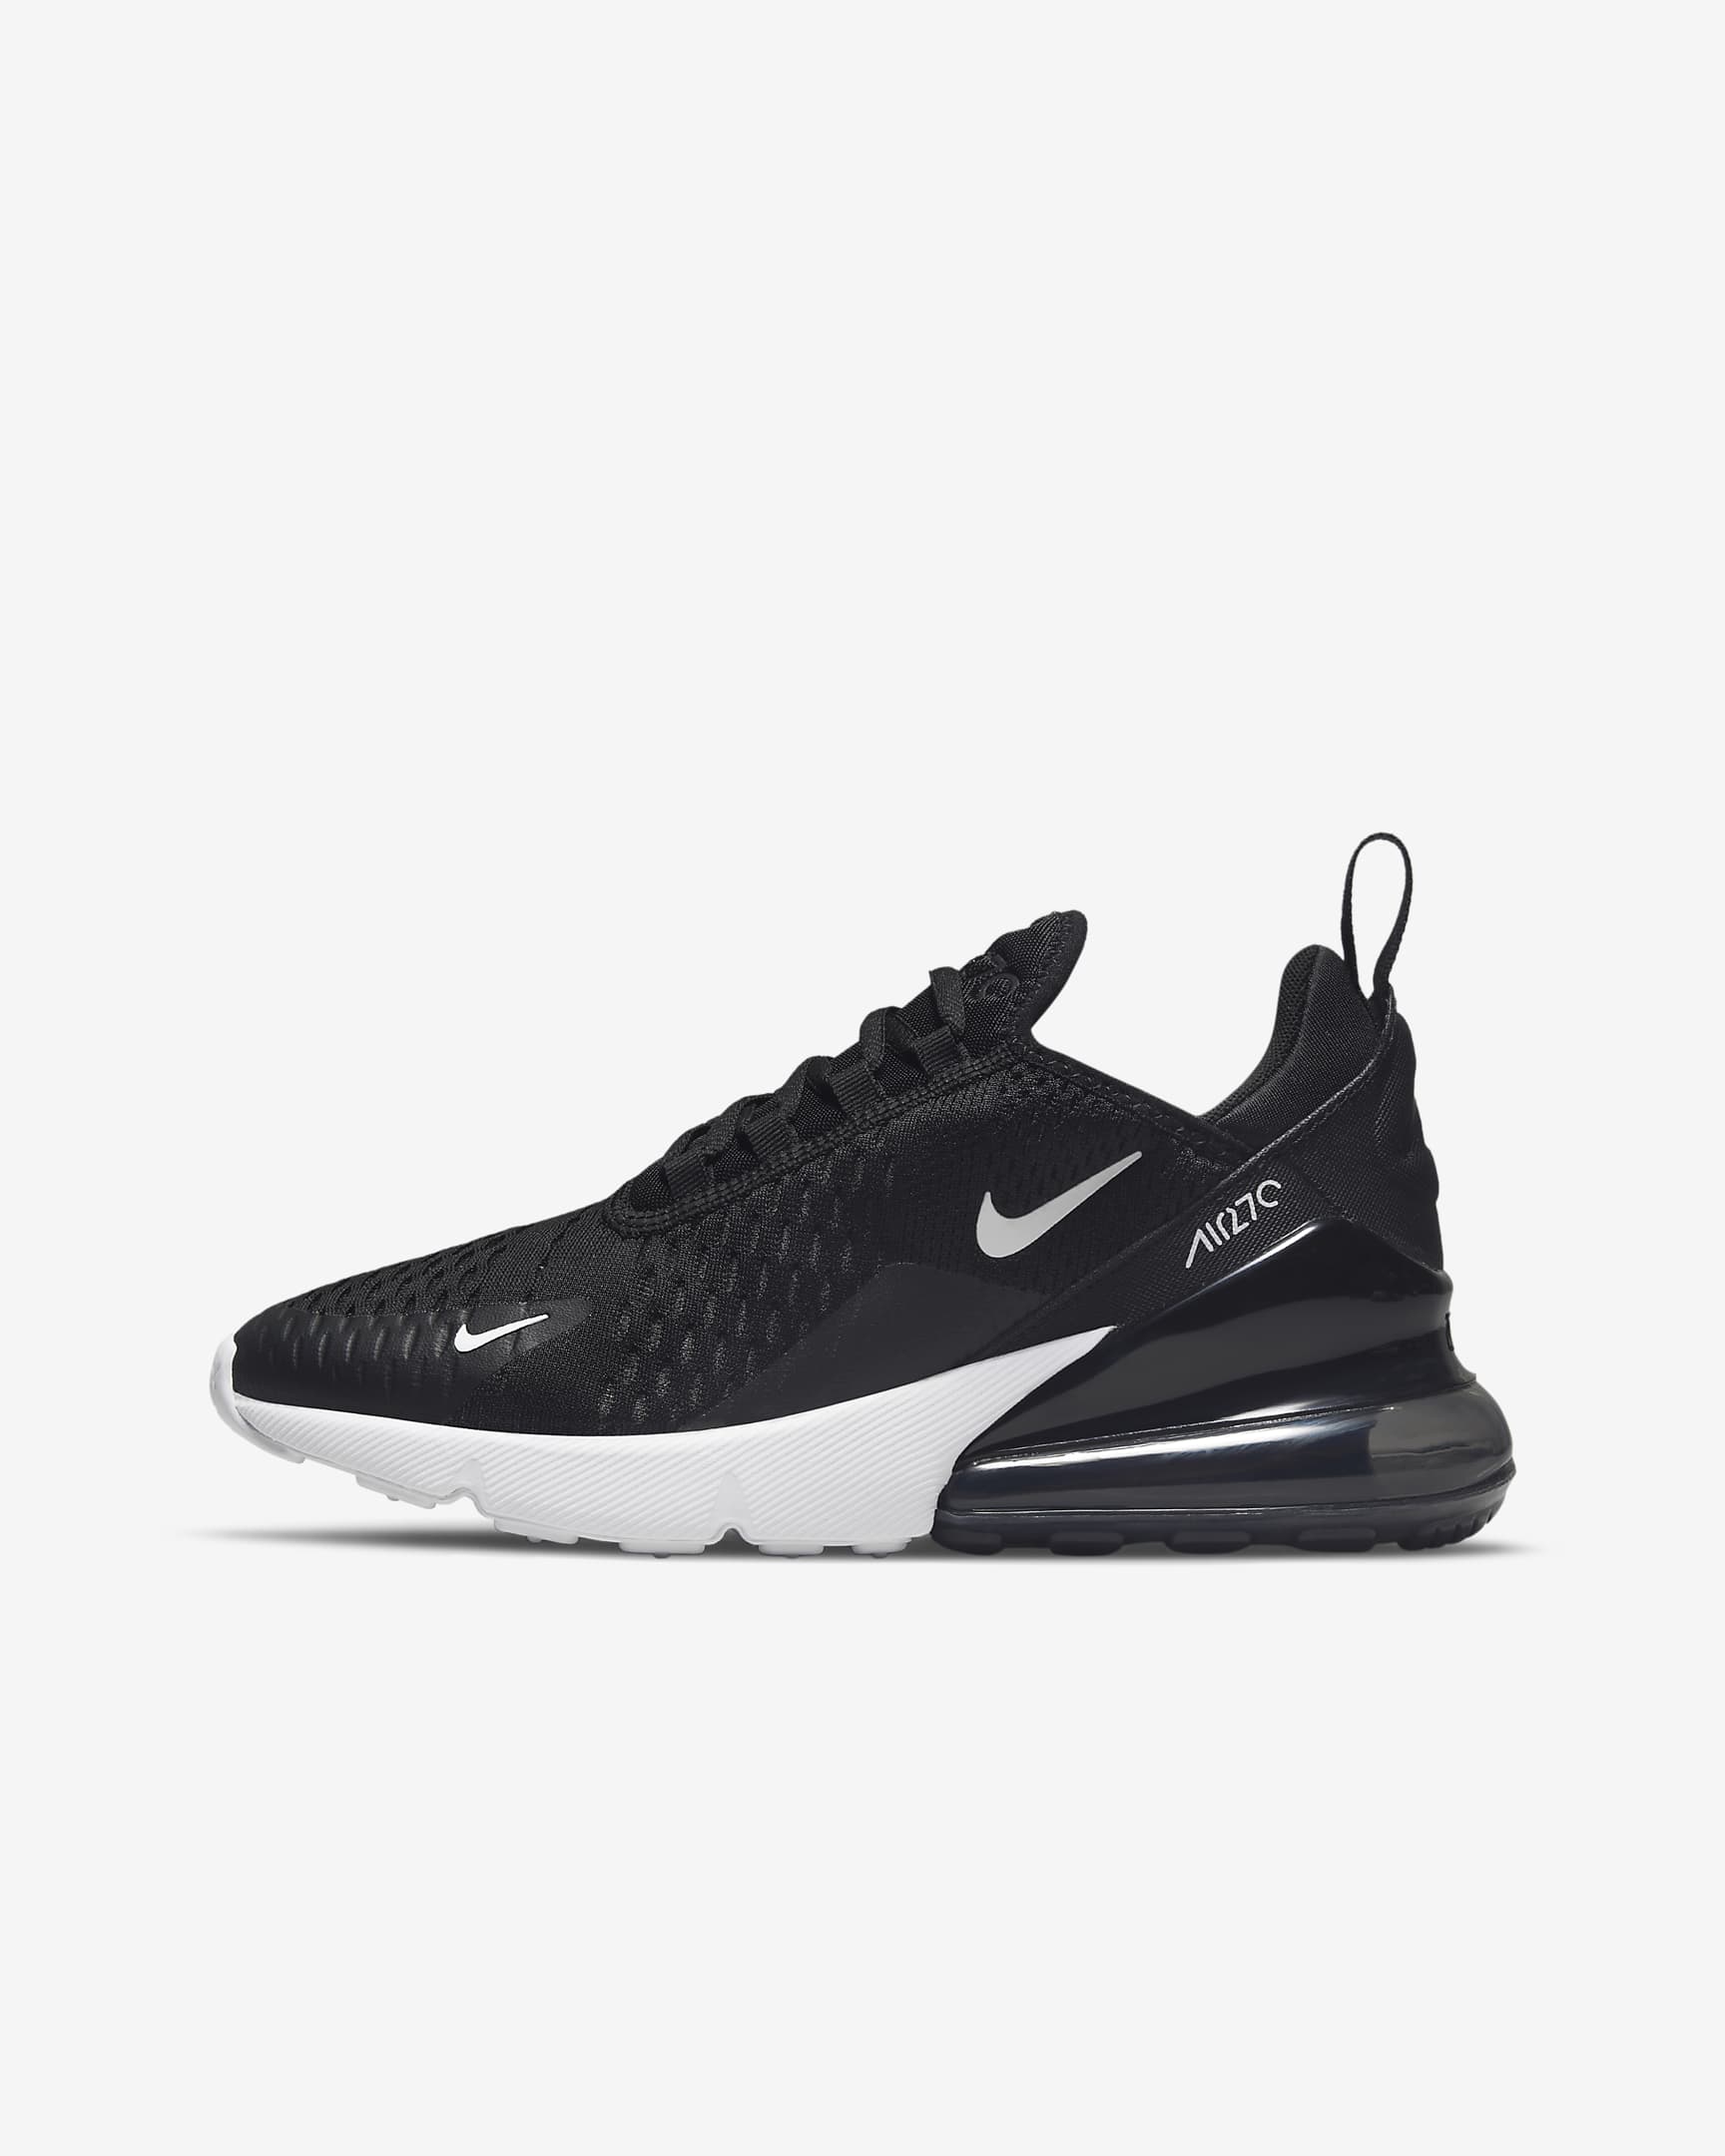 Nike Air Max 270 Older Kids' Shoes - Black/Anthracite/White